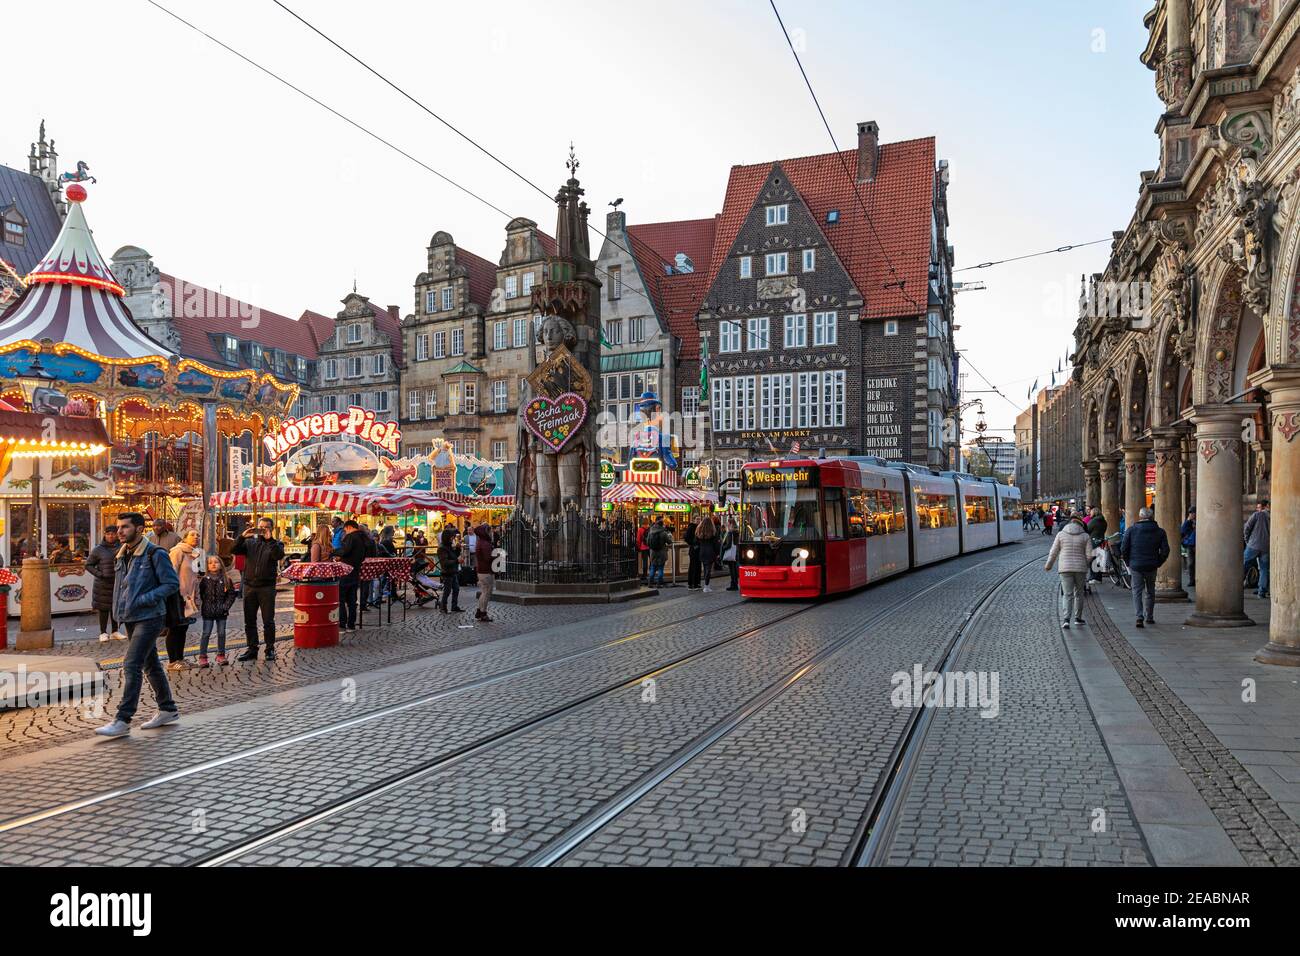 Tram, small free market on the market square in Bremen's old town, Bremen, Stock Photo